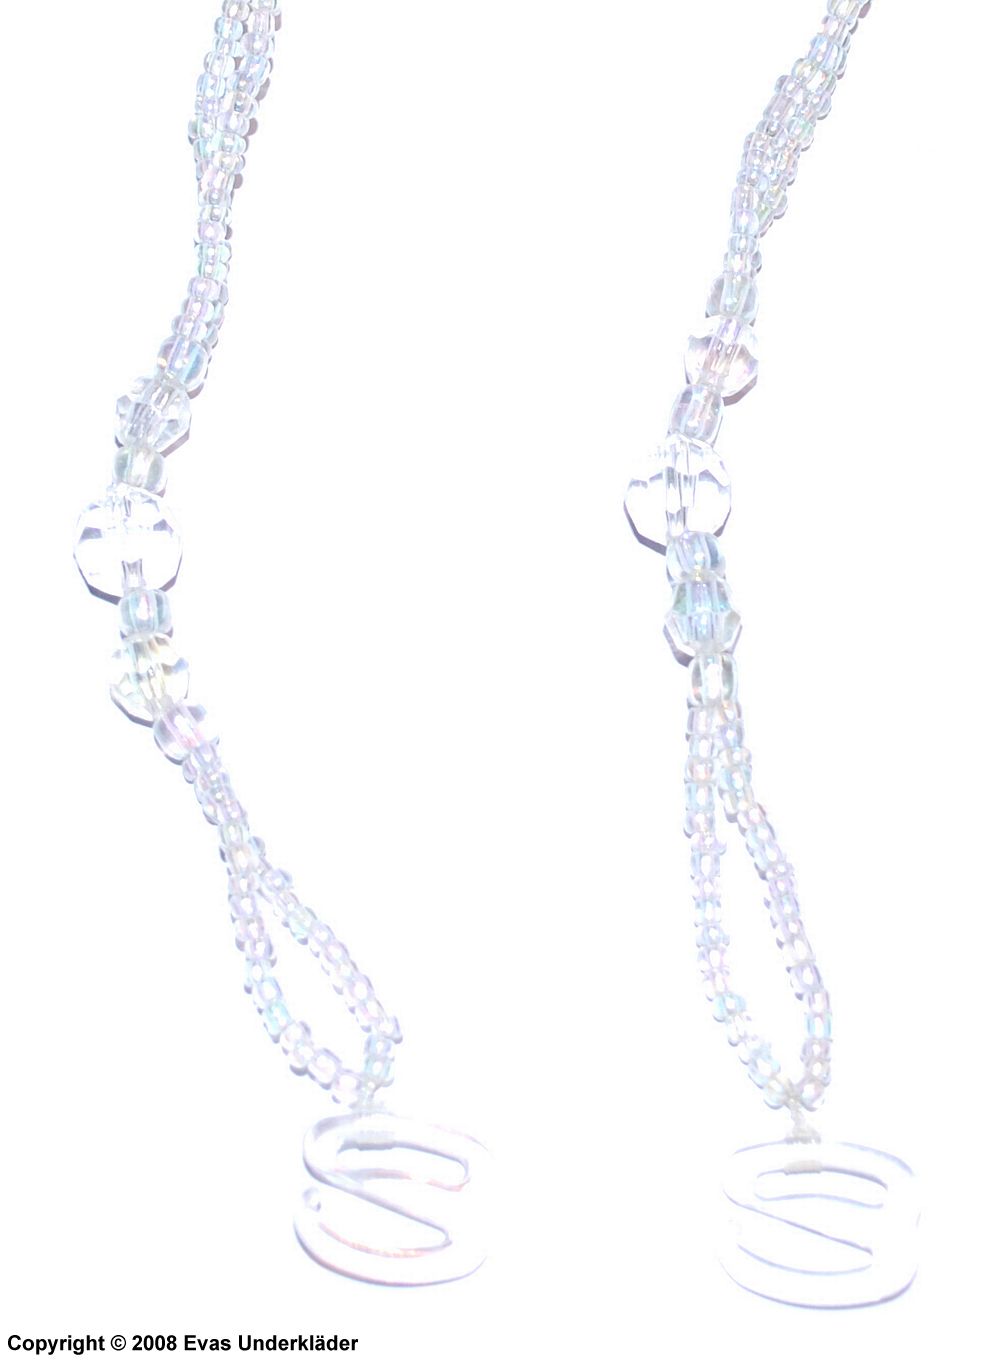 Bra straps with clear beads